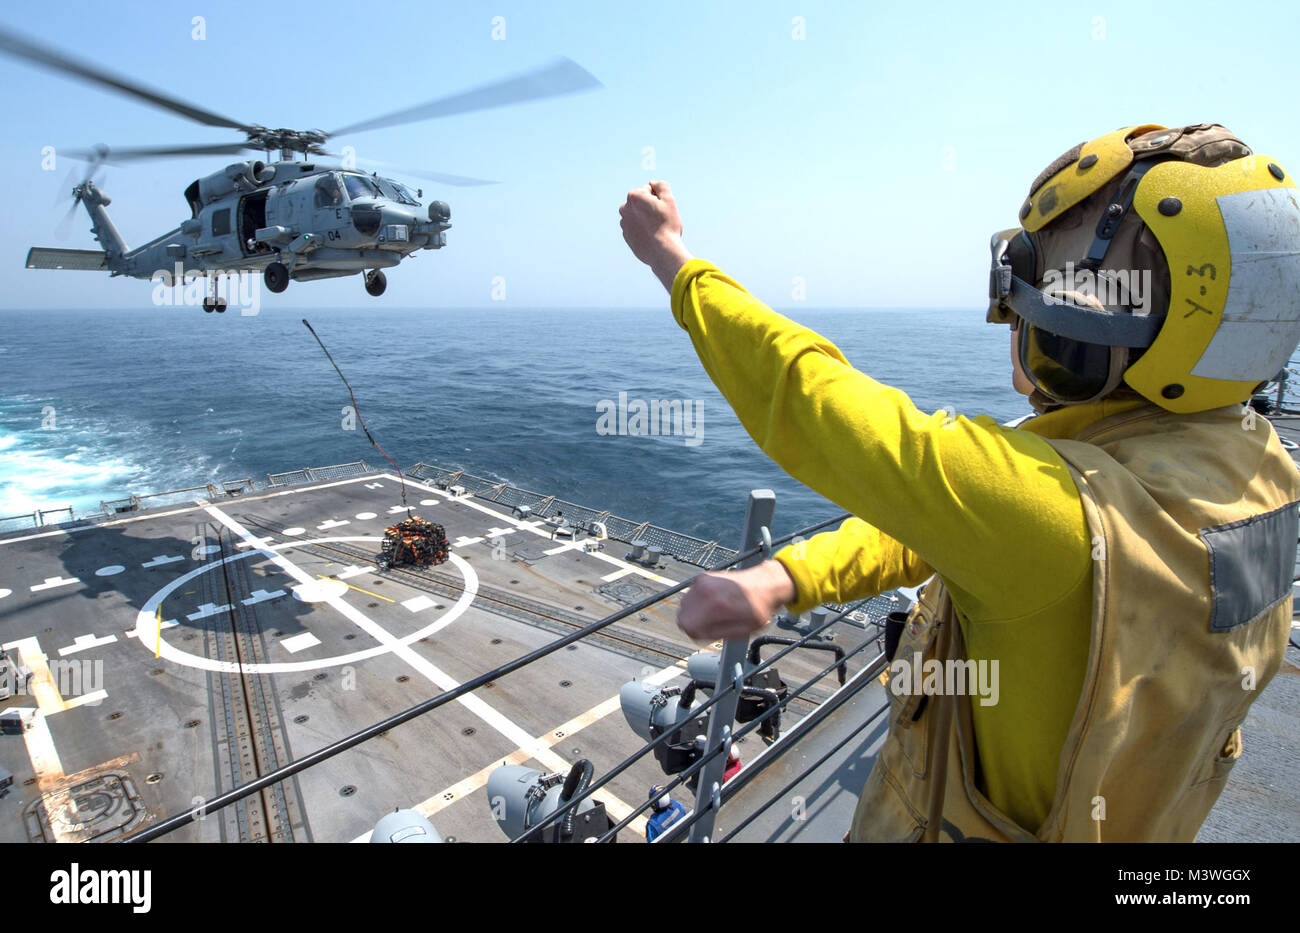 170512-N-HI376-091  WATERS SOUTH OF JAPAN (May 12, 2017) Electronics Technician 3rd Class Jonathan Hill guides an MH-60R Sea Hawk helicopter assigned to the “Warlords” of Helicopter Maritime Strike Squadron (HSM) 51 during a vertical replenishment training exercise aboard the Arleigh Burke-class guided-missile destroyer USS McCampbell (DDG 85). The ship is on patrol in the U.S. 7th Fleet area of operations in support of security and stability in the Indo-Asia-Pacific region. (U.S. Navy photo by Mass Communication Specialist 2nd Class Jeremy Graham/Released) 170512-N-HI376-091 by Photograph Cur Stock Photo